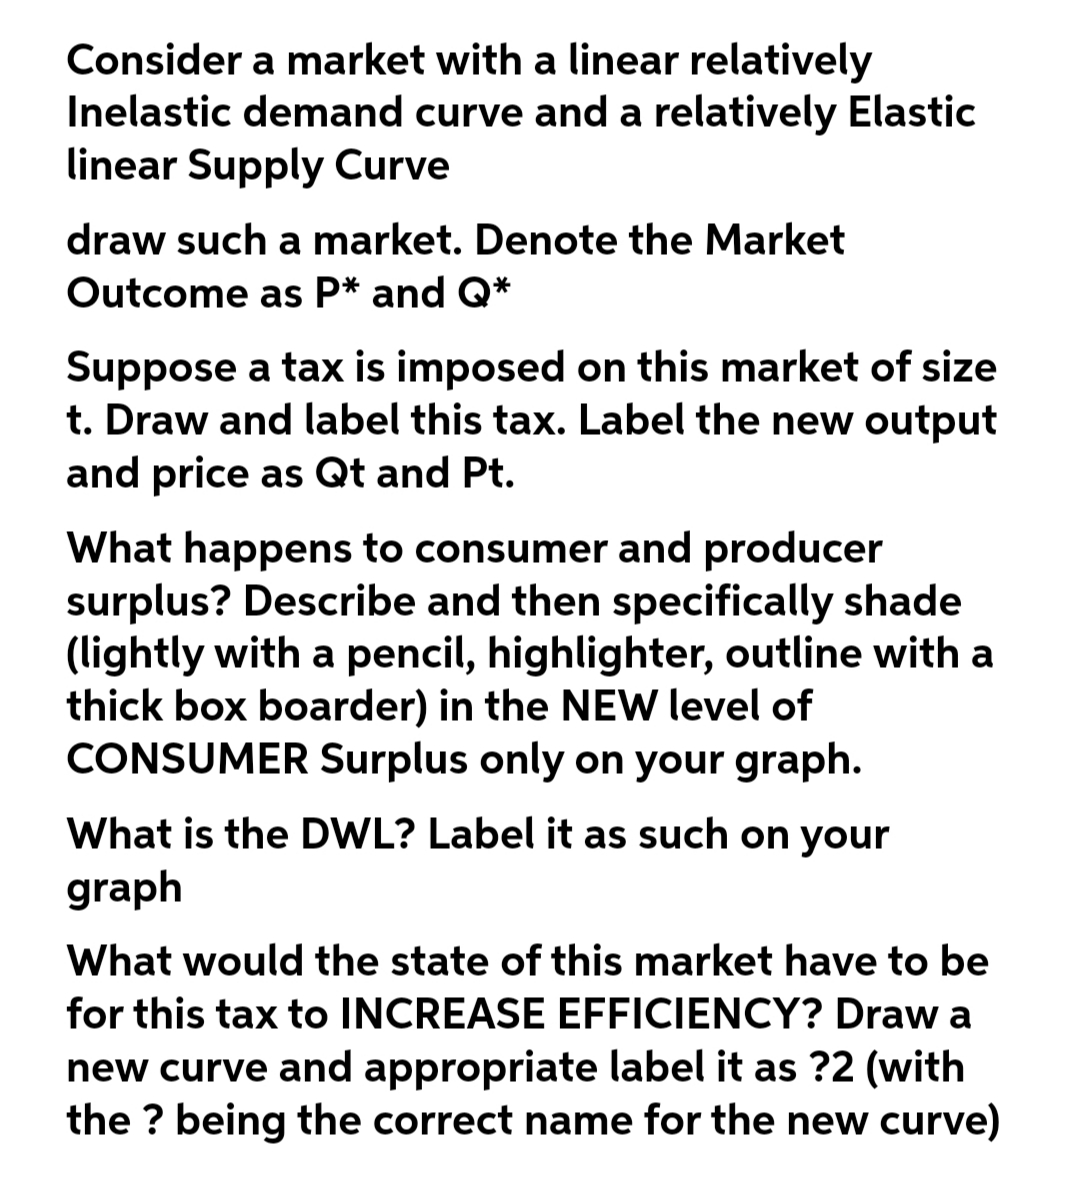 Consider a market with a linear relatively
Inelastic demand curve and a relatively Elastic
linear Supply Curve
draw such a market. Denote the Market
Outcome as P* and Q*
Suppose a tax is imposed on this market of size
t. Draw and label this tax. Label the new output
and price as Qt and Pt.
What happens to consumer and producer
surplus? Describe and then specifically shade
(lightly with a pencil, highlighter, outline with a
thick box boarder) in the NEW level of
CONSUMER Surplus only on your graph.
What is the DWL? Label it as such on your
graph
What would the state of this market have to be
for this tax to INCREASE EFFICIENCY? Draw a
new curve and appropriate label it as ?2 (with
the ? being the correct name for the new curve)
